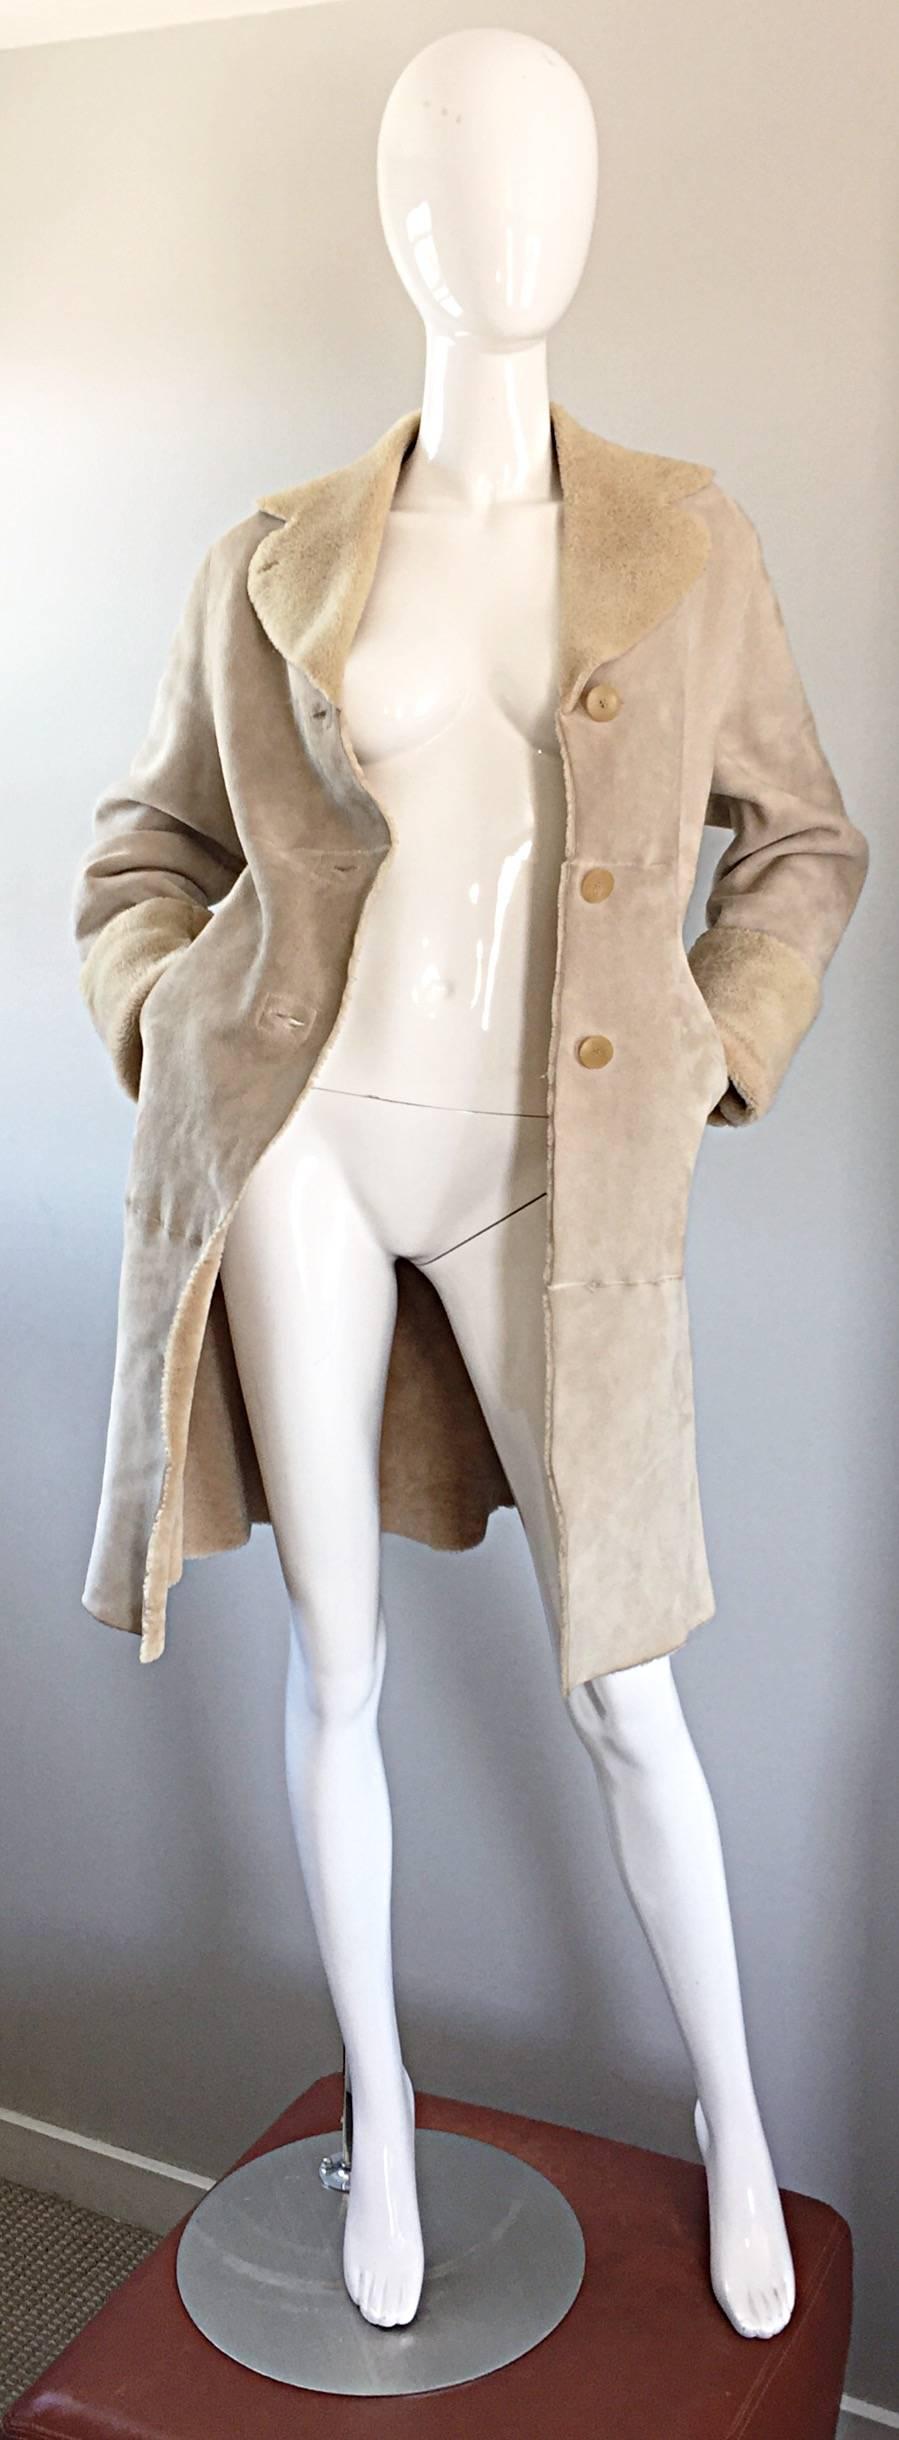 Chic, stylish and comfortable vintage (unworn) early 1990s GIORGIO ARMANI nude / tan / light brown shearling fur suede leather car coat! Three buttons up the front, with two exterior pockets, along with interior pockets. Cuffs can be adjusted to fit